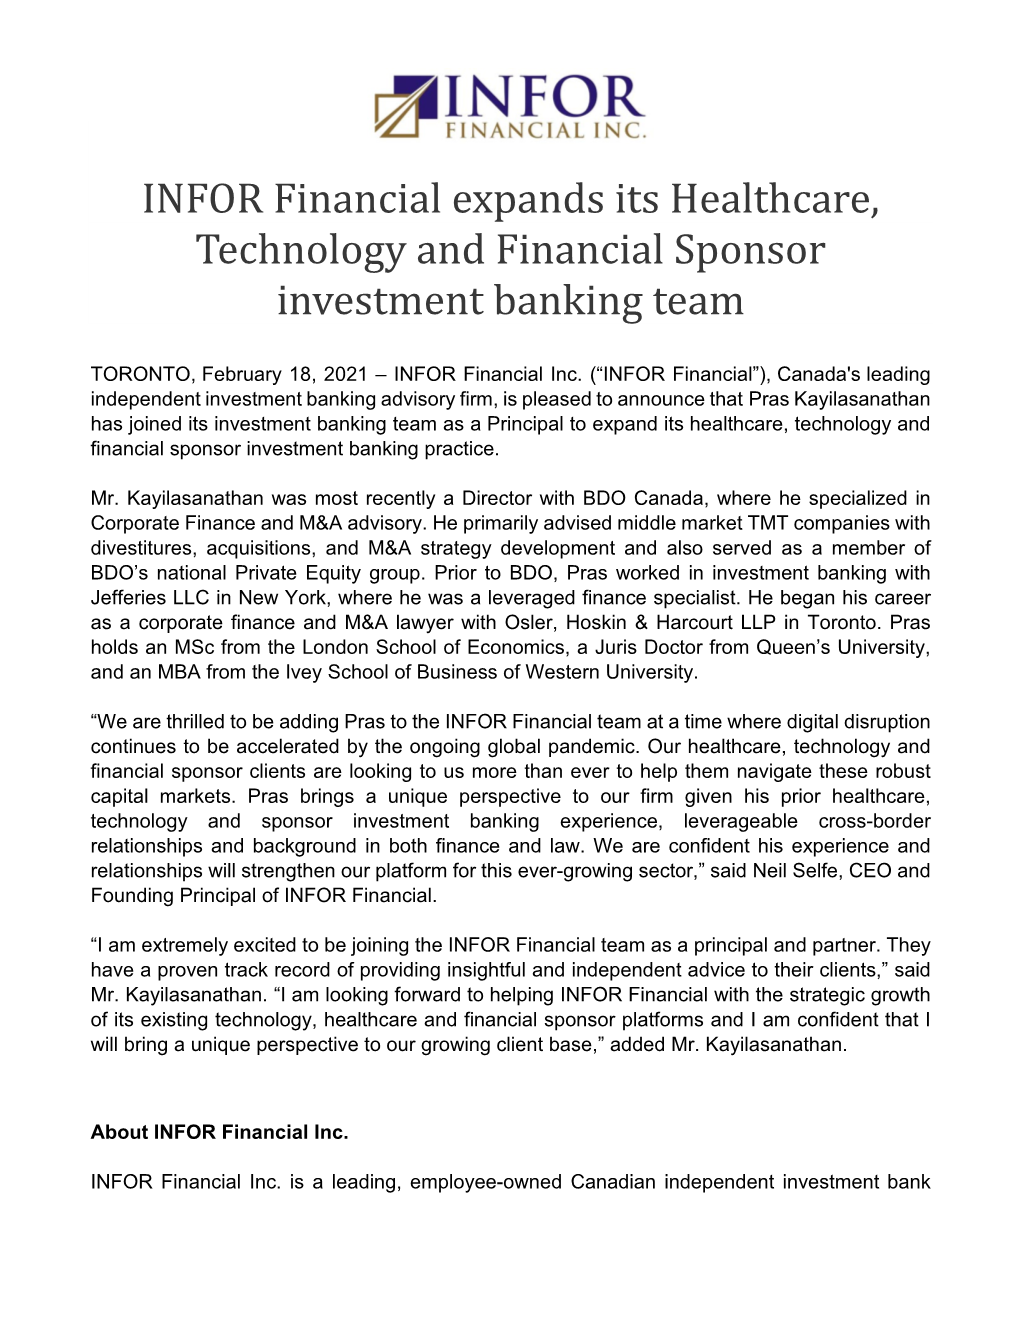 INFOR Financial Expands Its Healthcare, Technology and Financial Sponsor Investment Banking Team